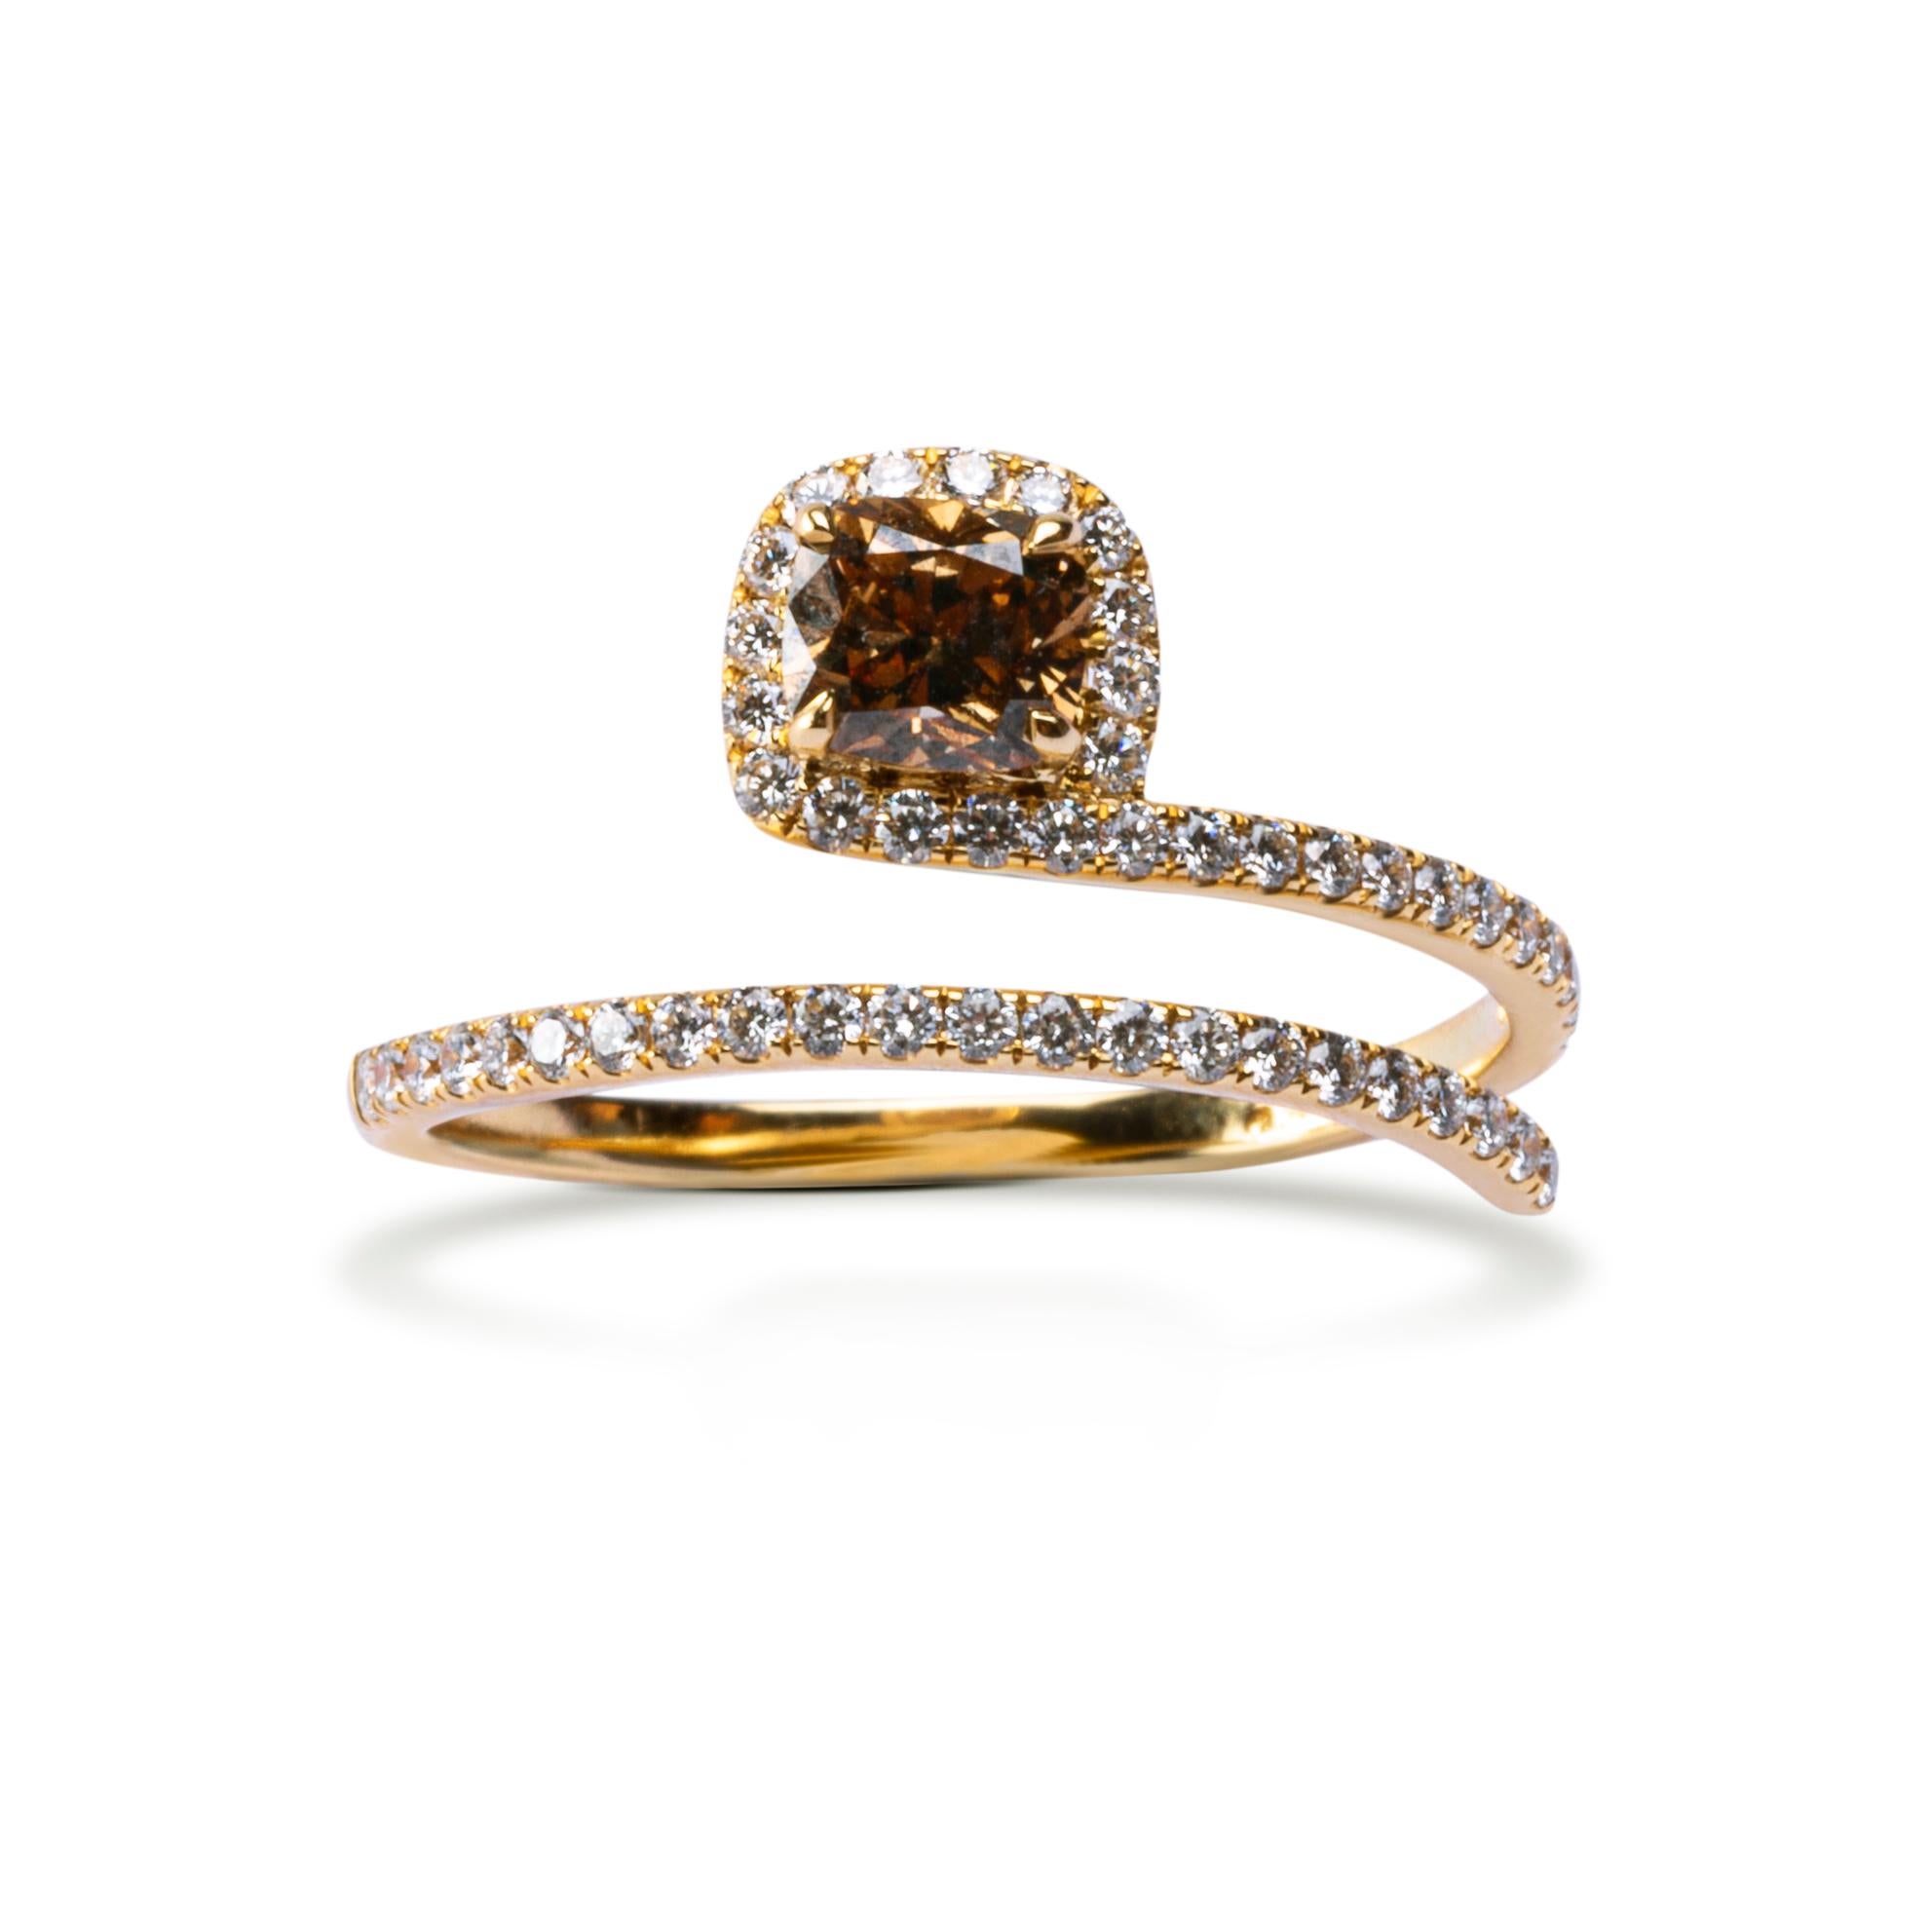 Alex Jona, hand crafted in Italy 18 karat yellow gold coil ring, centering a cushion cut brown diamond weighing 0.47 carats, accented by 50 white diamonds, F color, VVS1 clarity, weighing 0.30 carats in total. 
Size: 6.5 US/12 EU, can be sized to